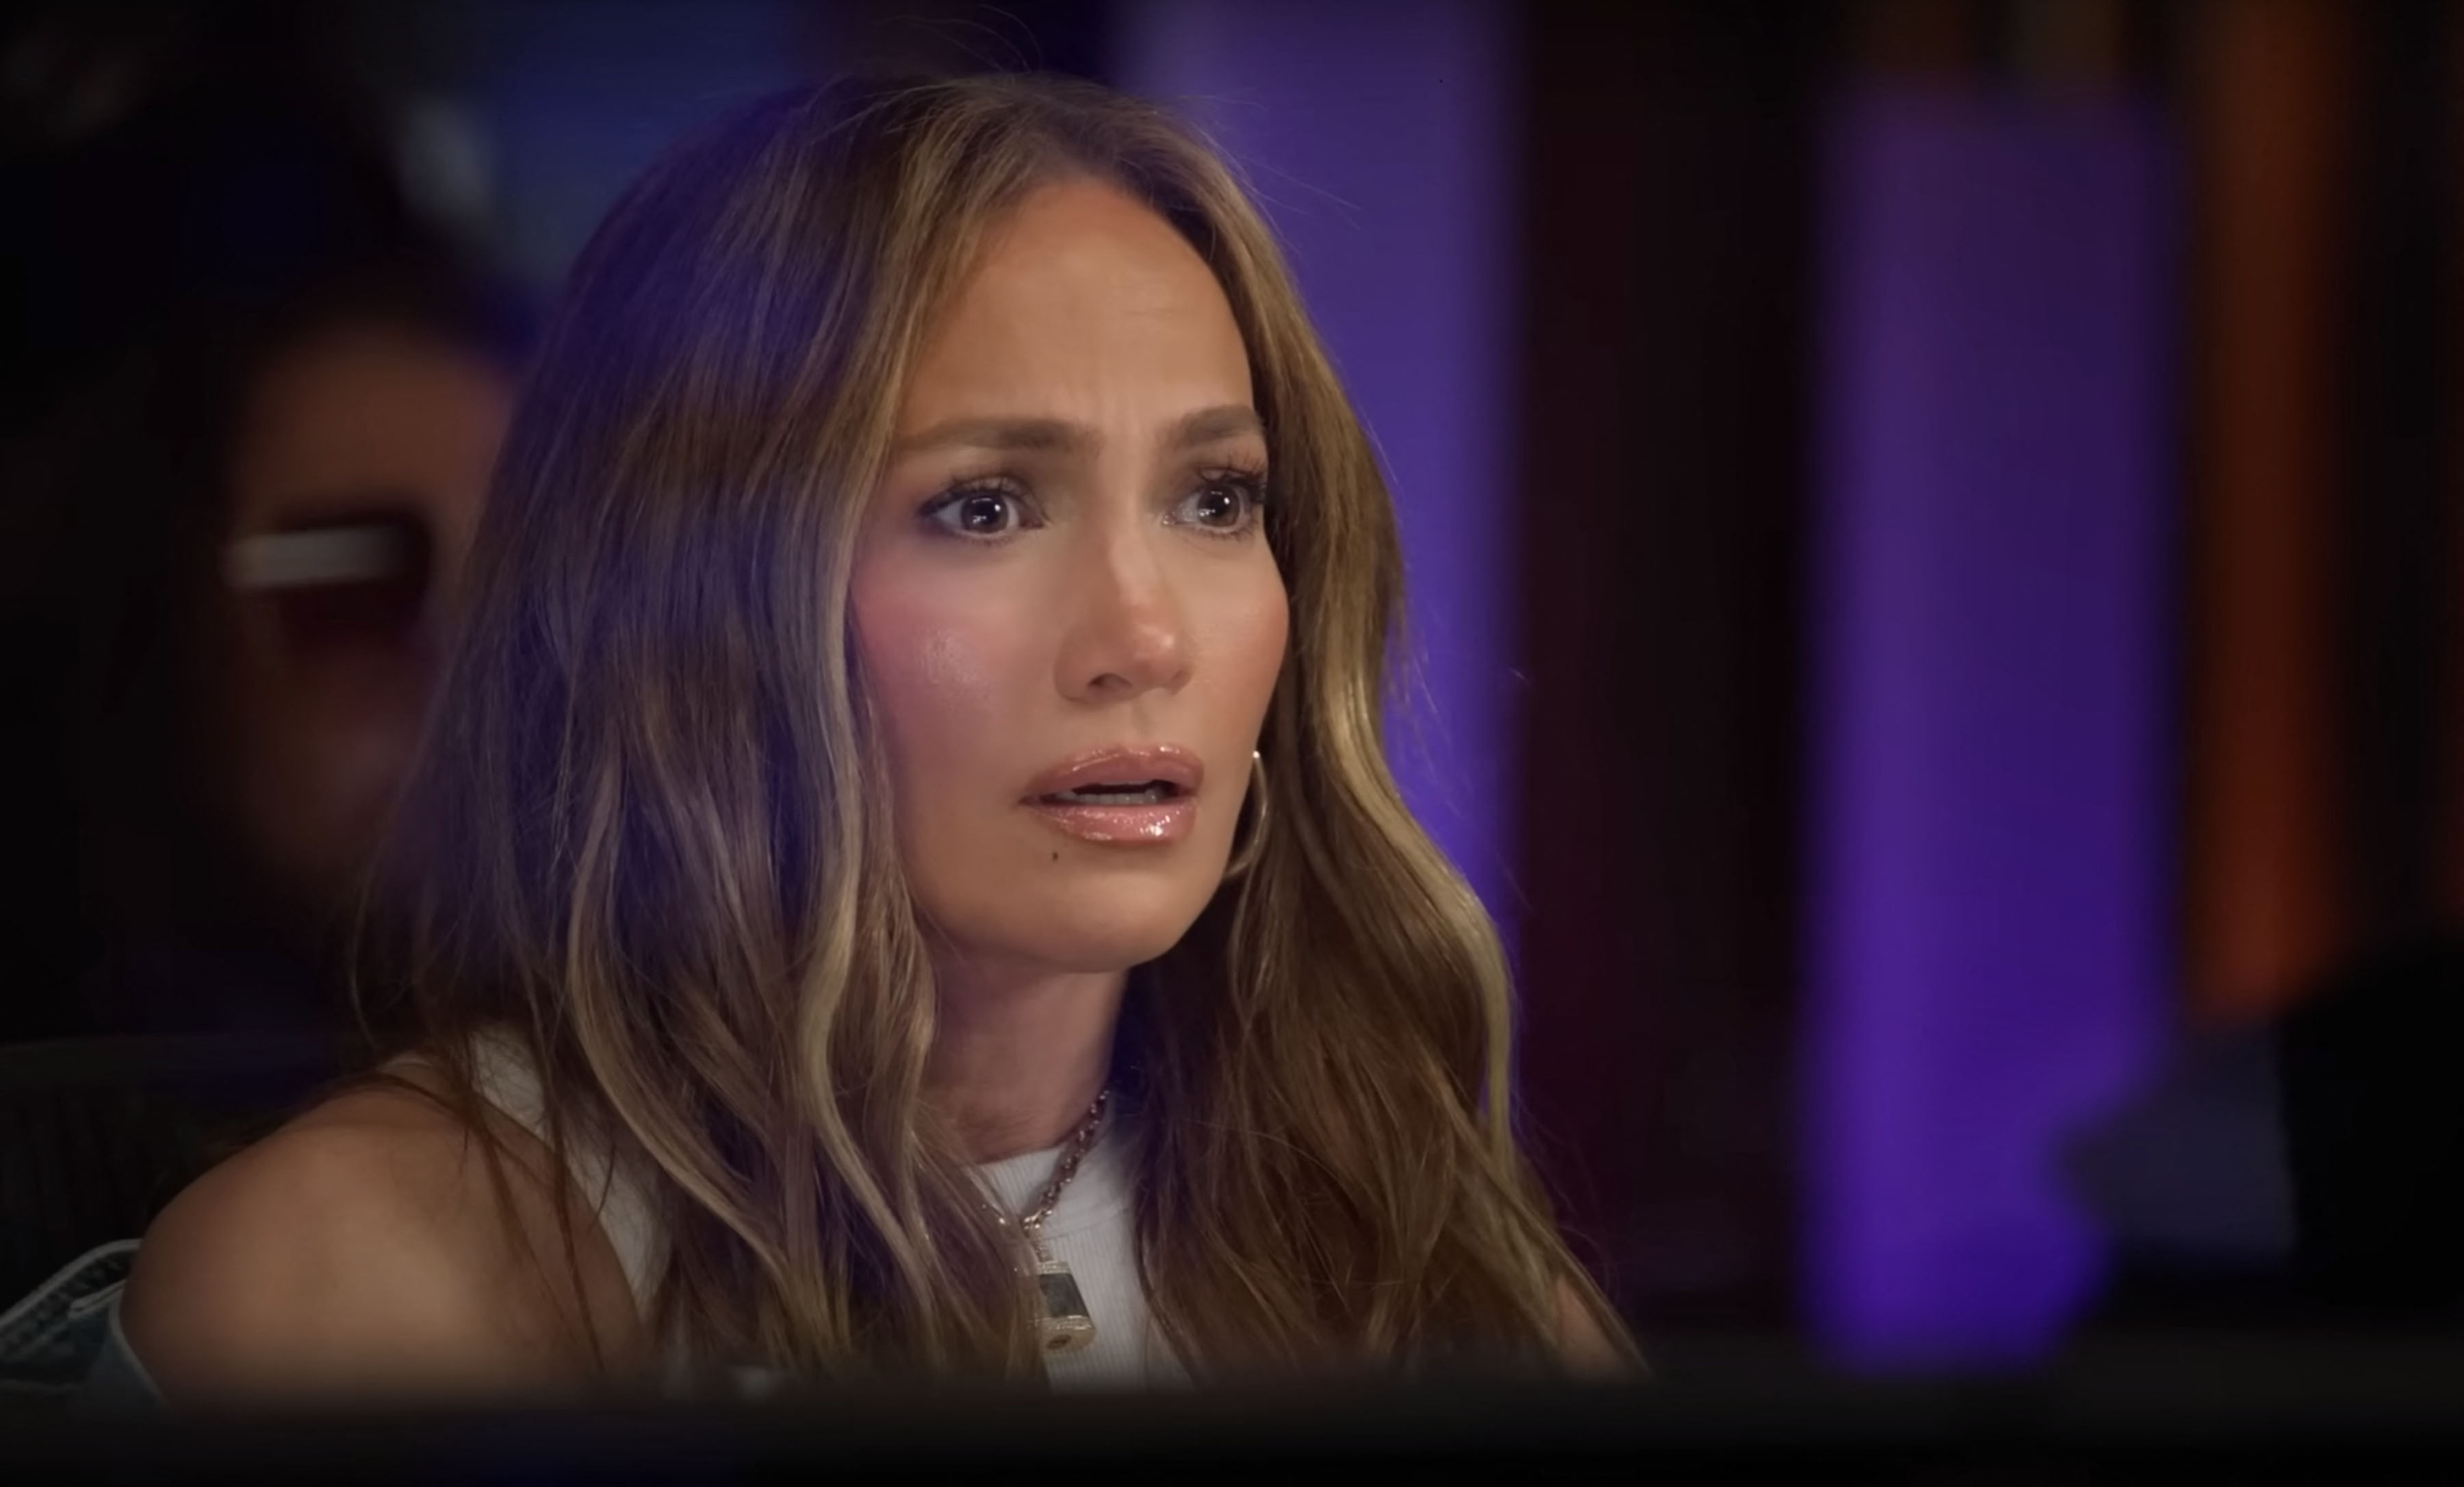 Jennifer looked embarrassed as she said: 'We talked about this'